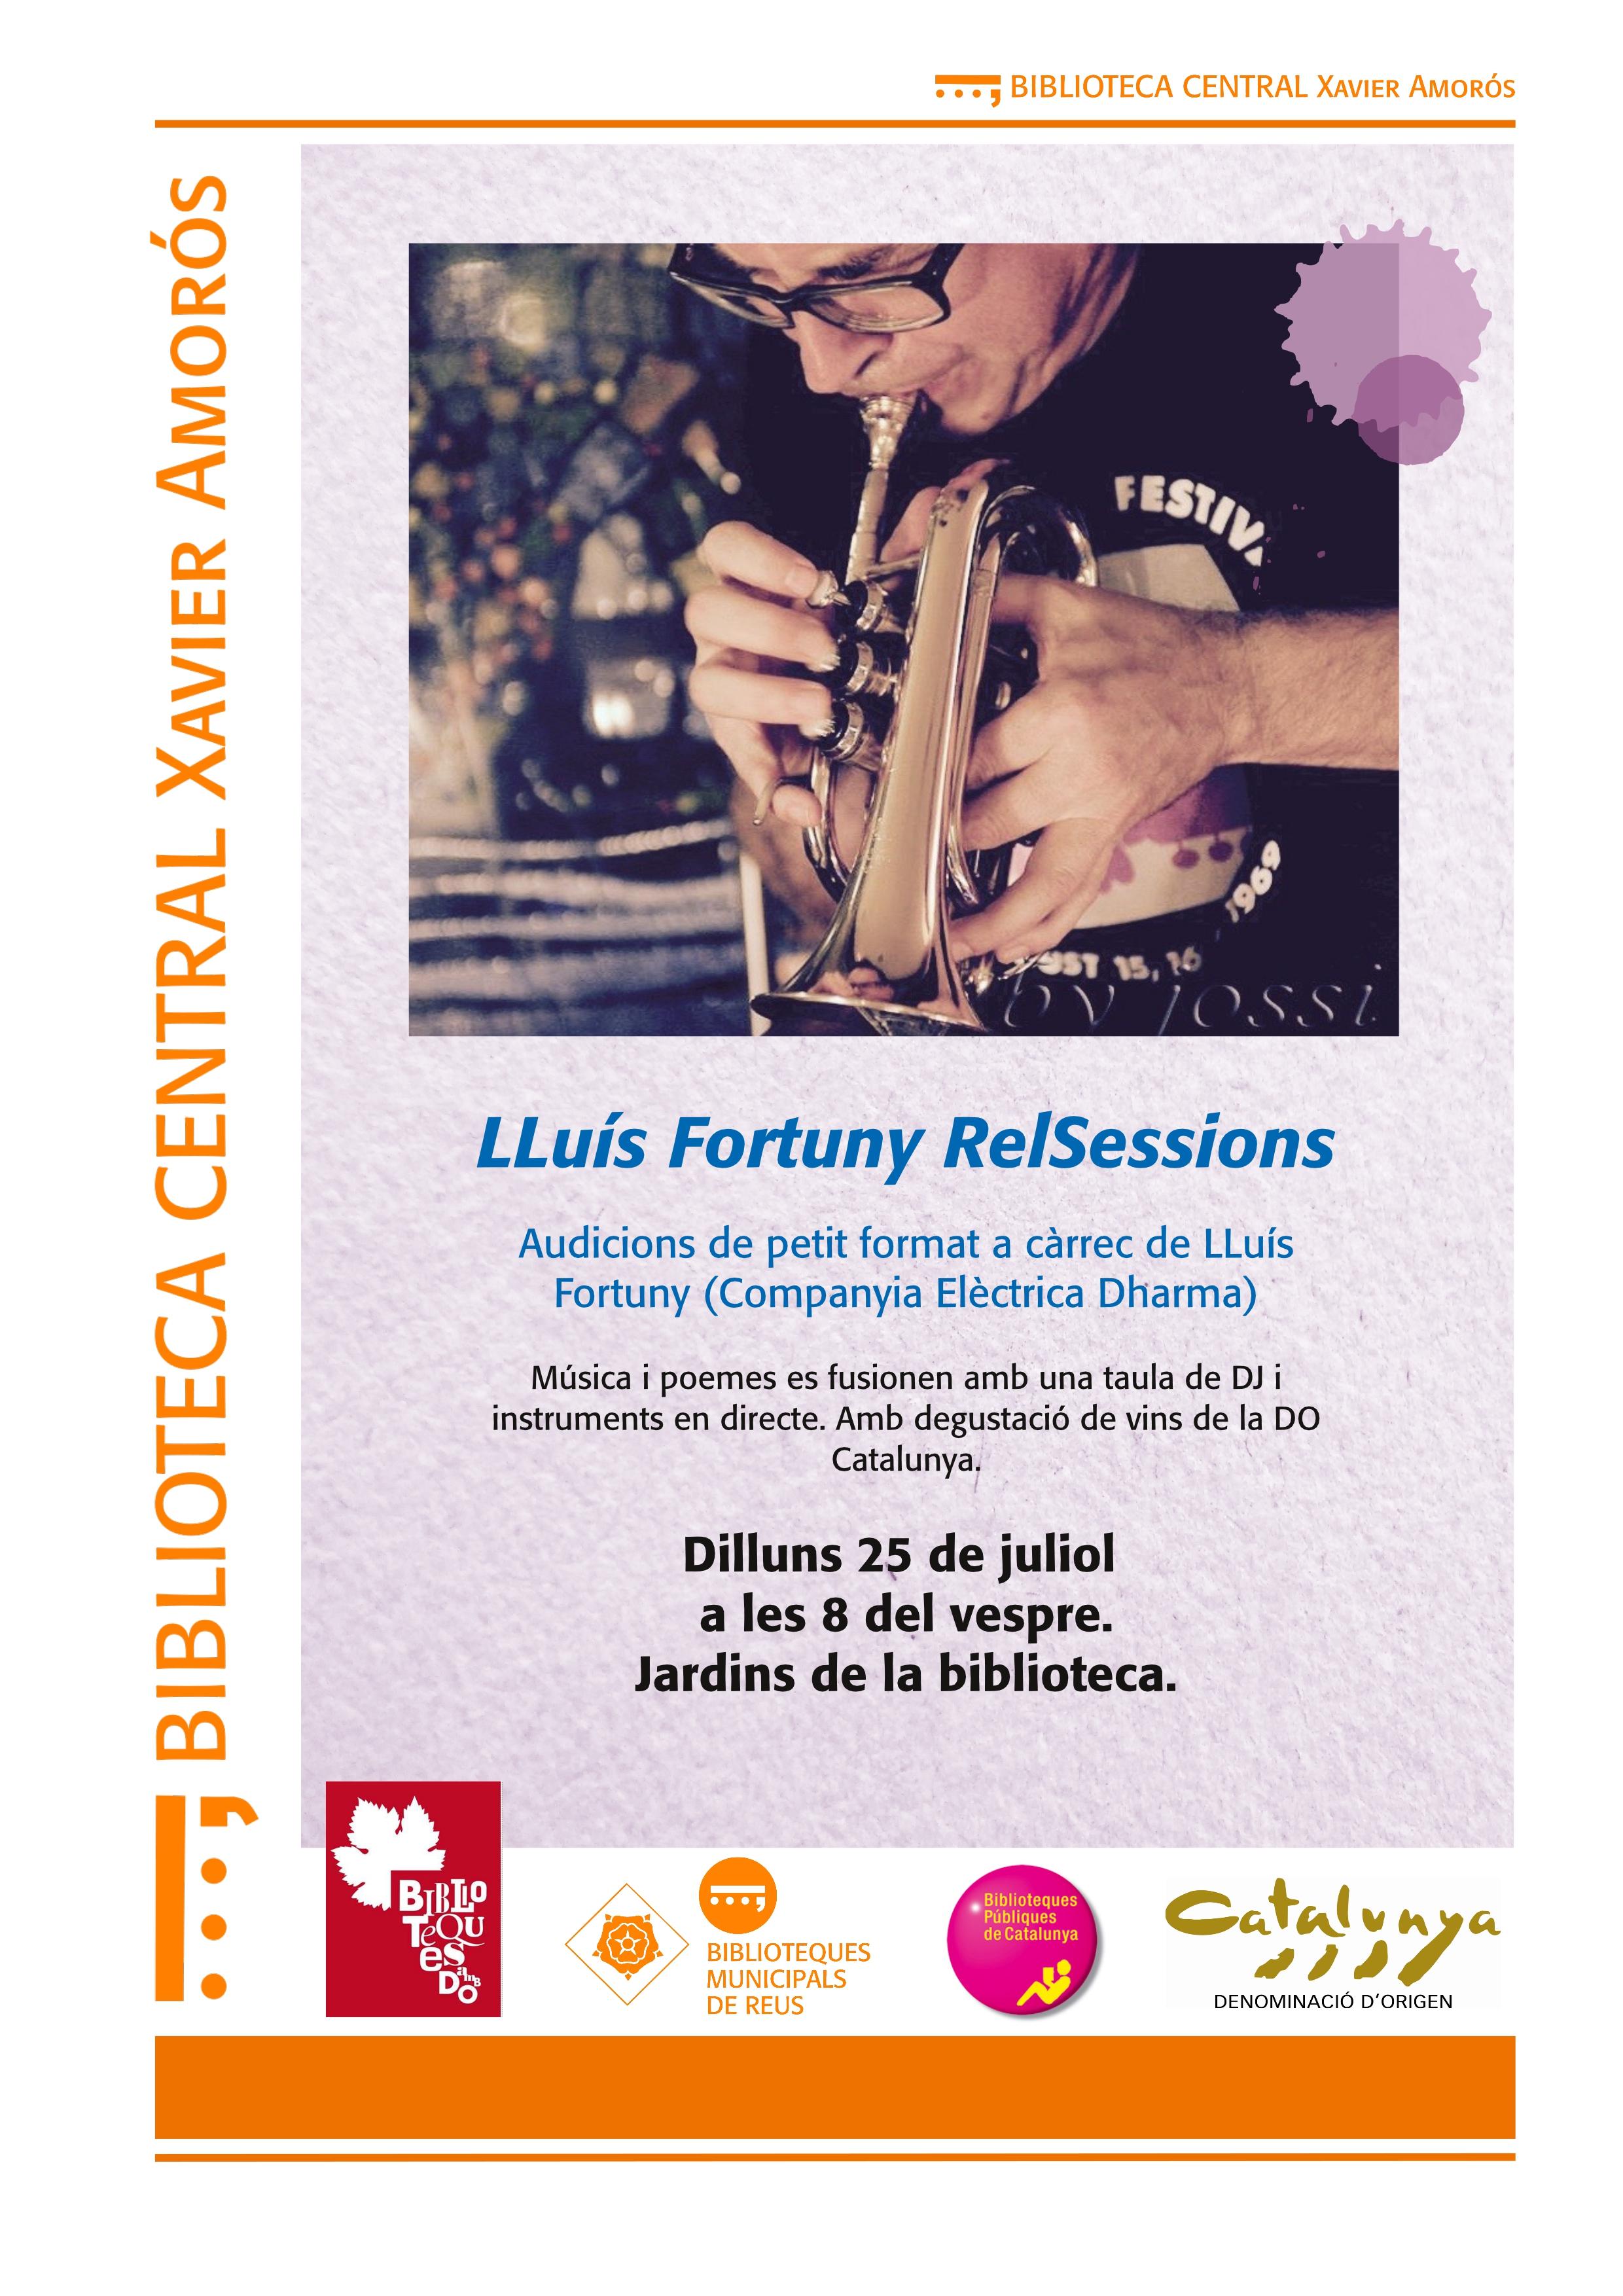 Lluís Fortuny RelSessions